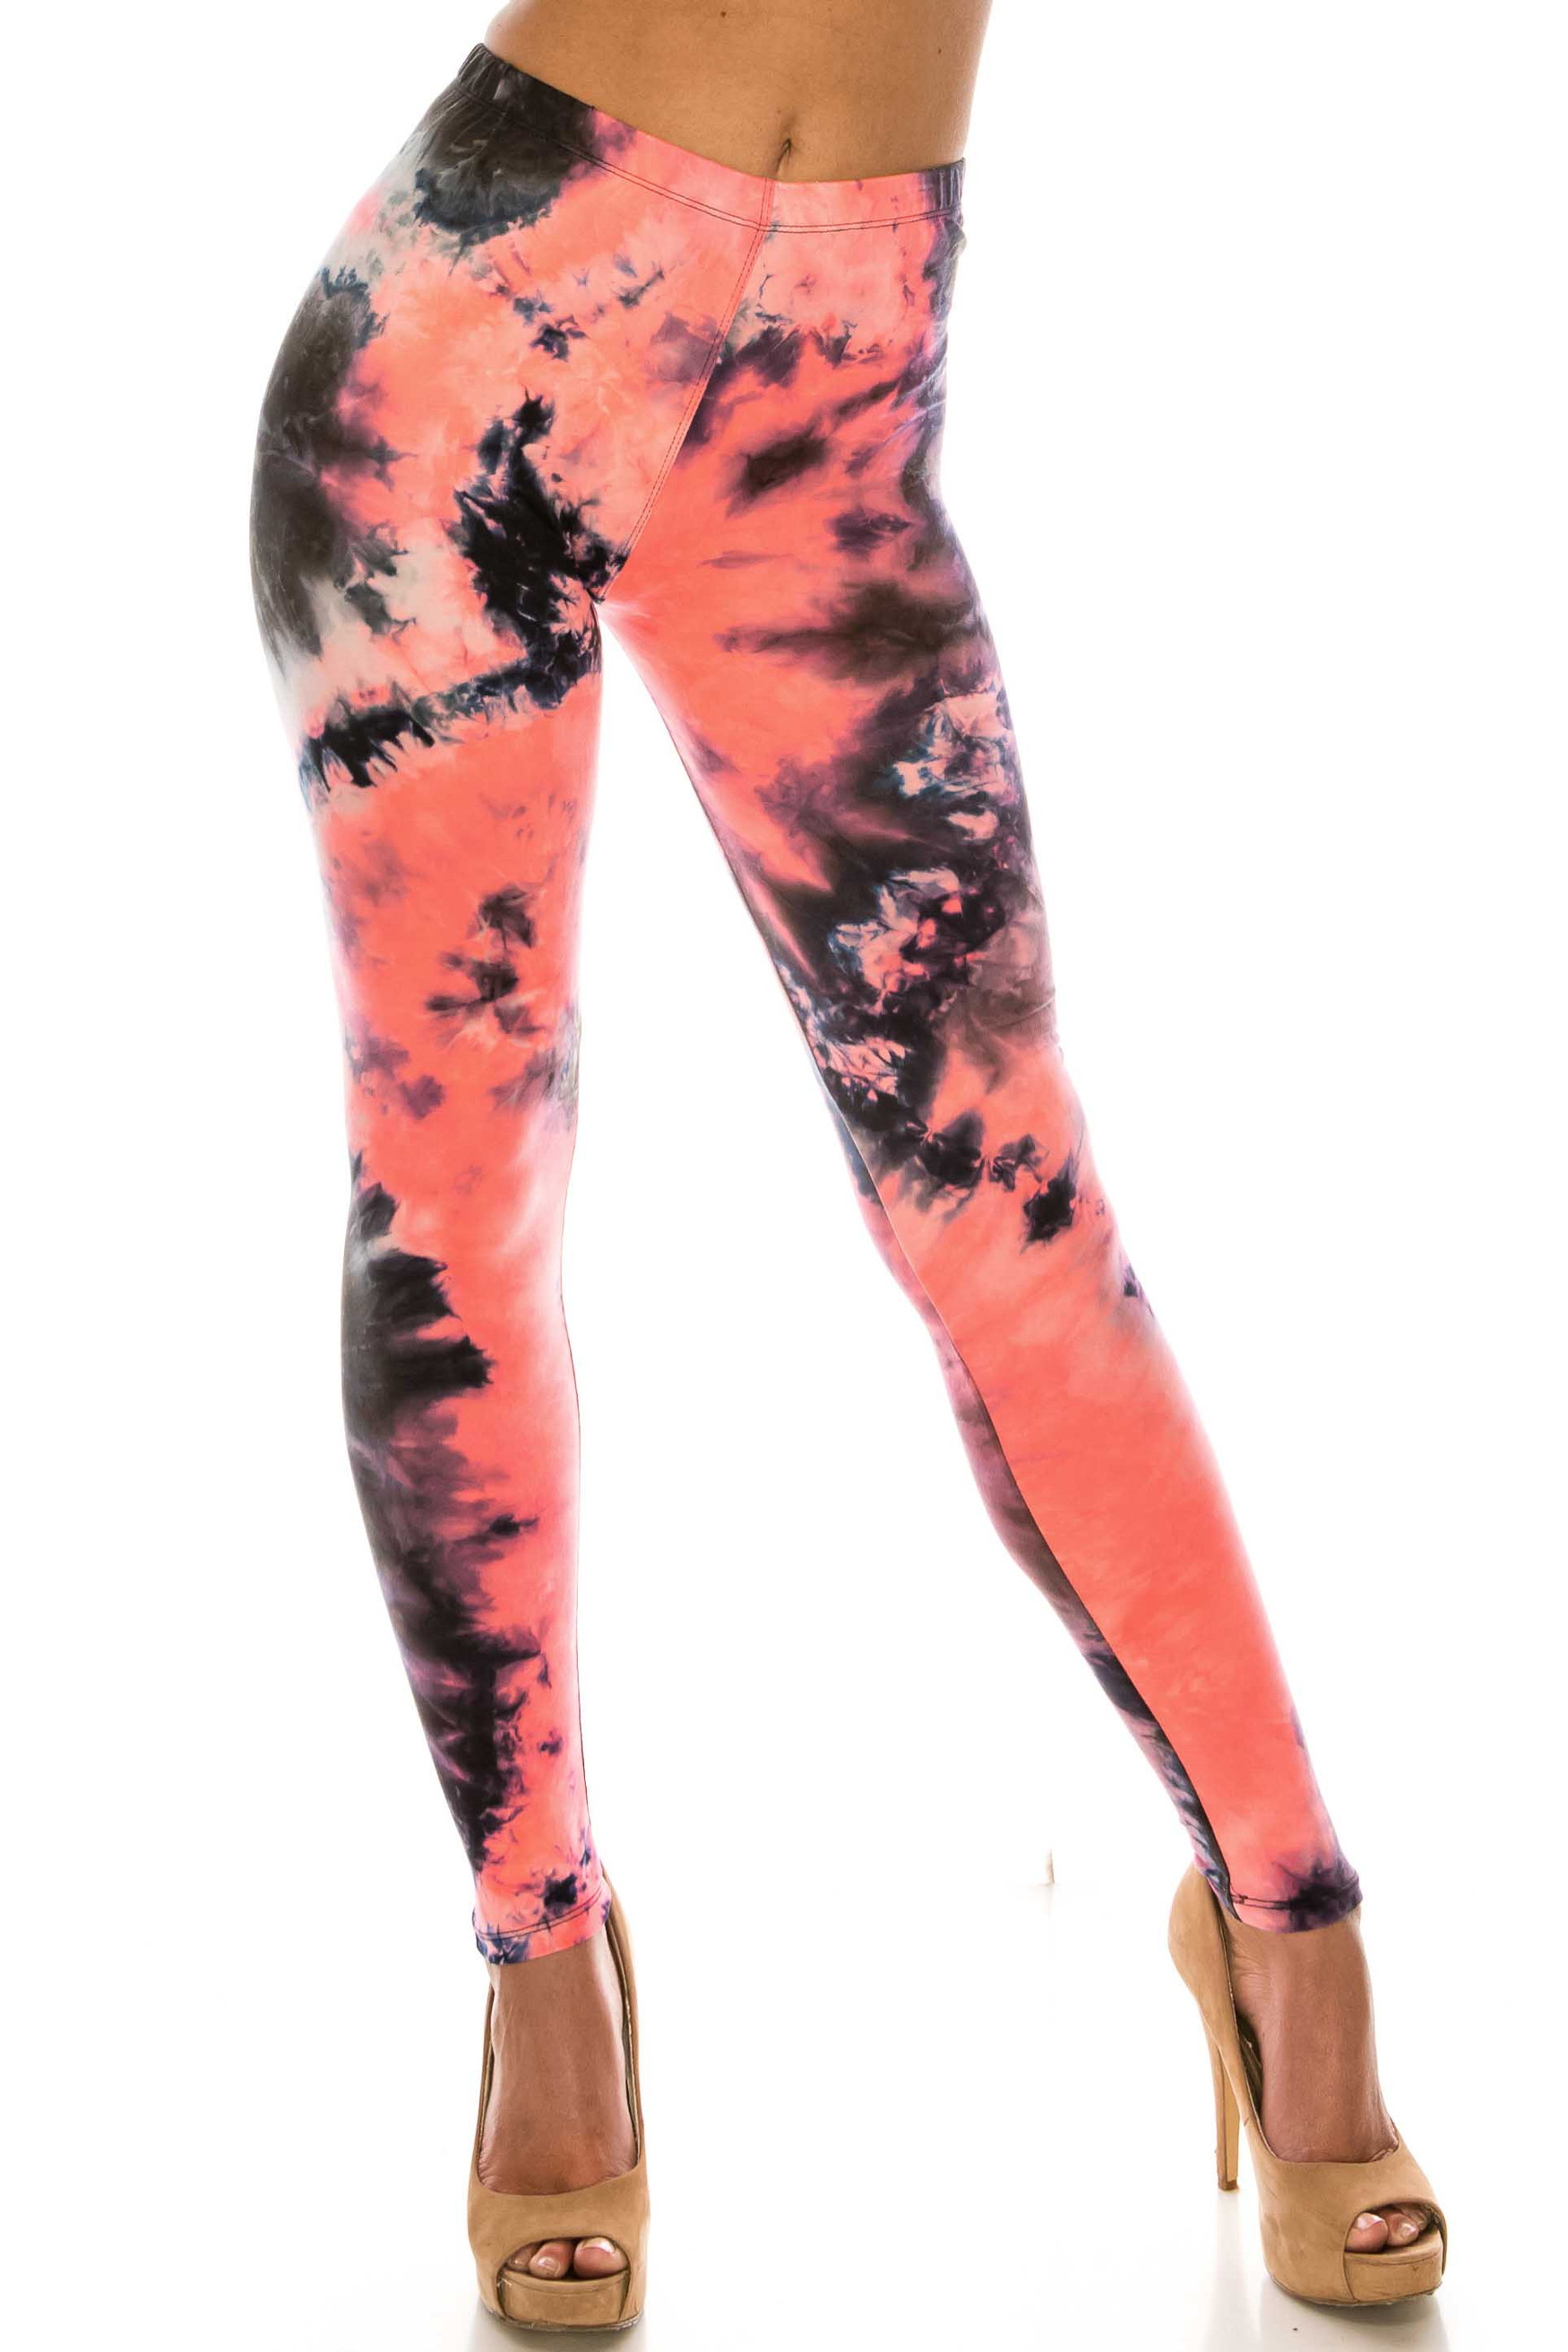 Buttery Soft Coral Tie Dye Extra Plus Size Leggings - 3X-5X